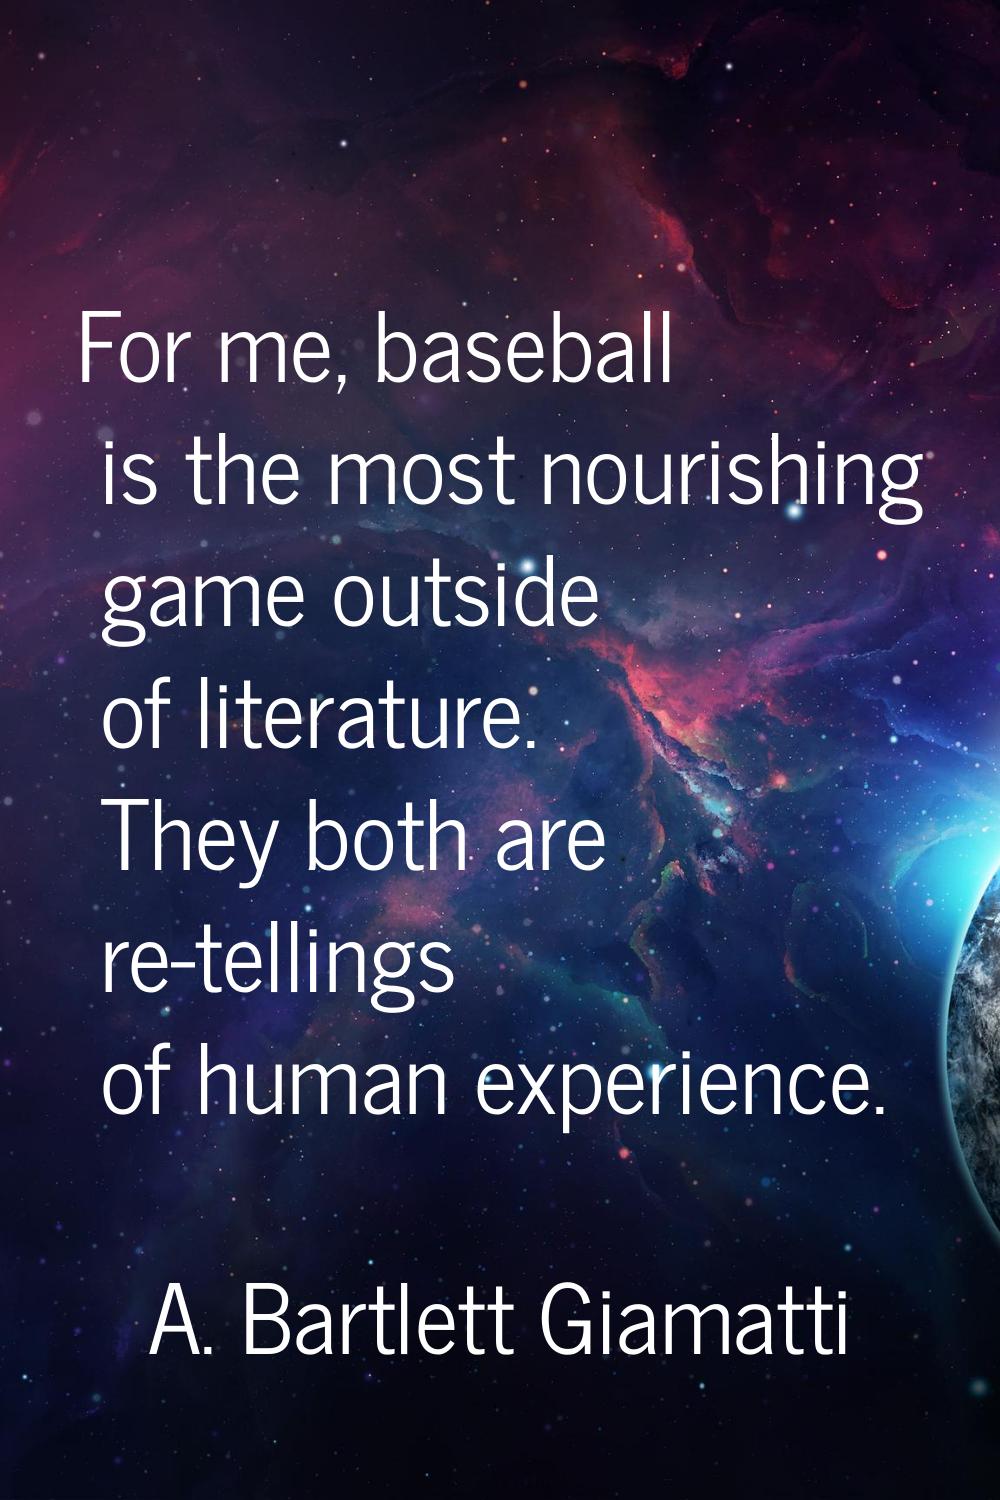 For me, baseball is the most nourishing game outside of literature. They both are re-tellings of hu